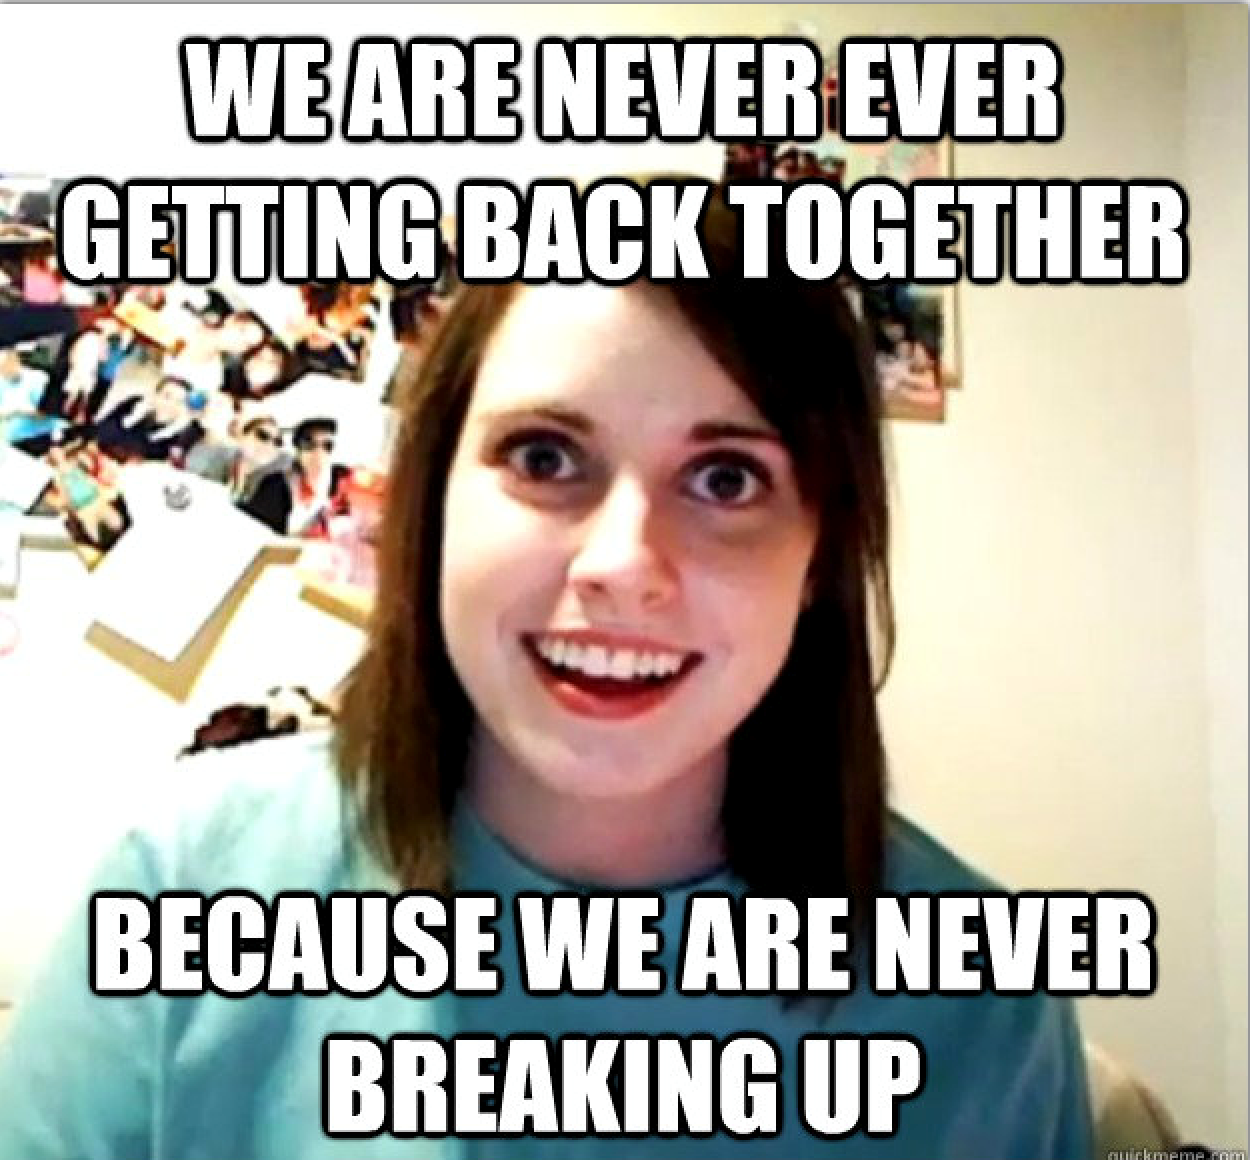 Together because Мем. No girlfriend no problem Мем. We are never ever getting back together. Overly. Getting back together